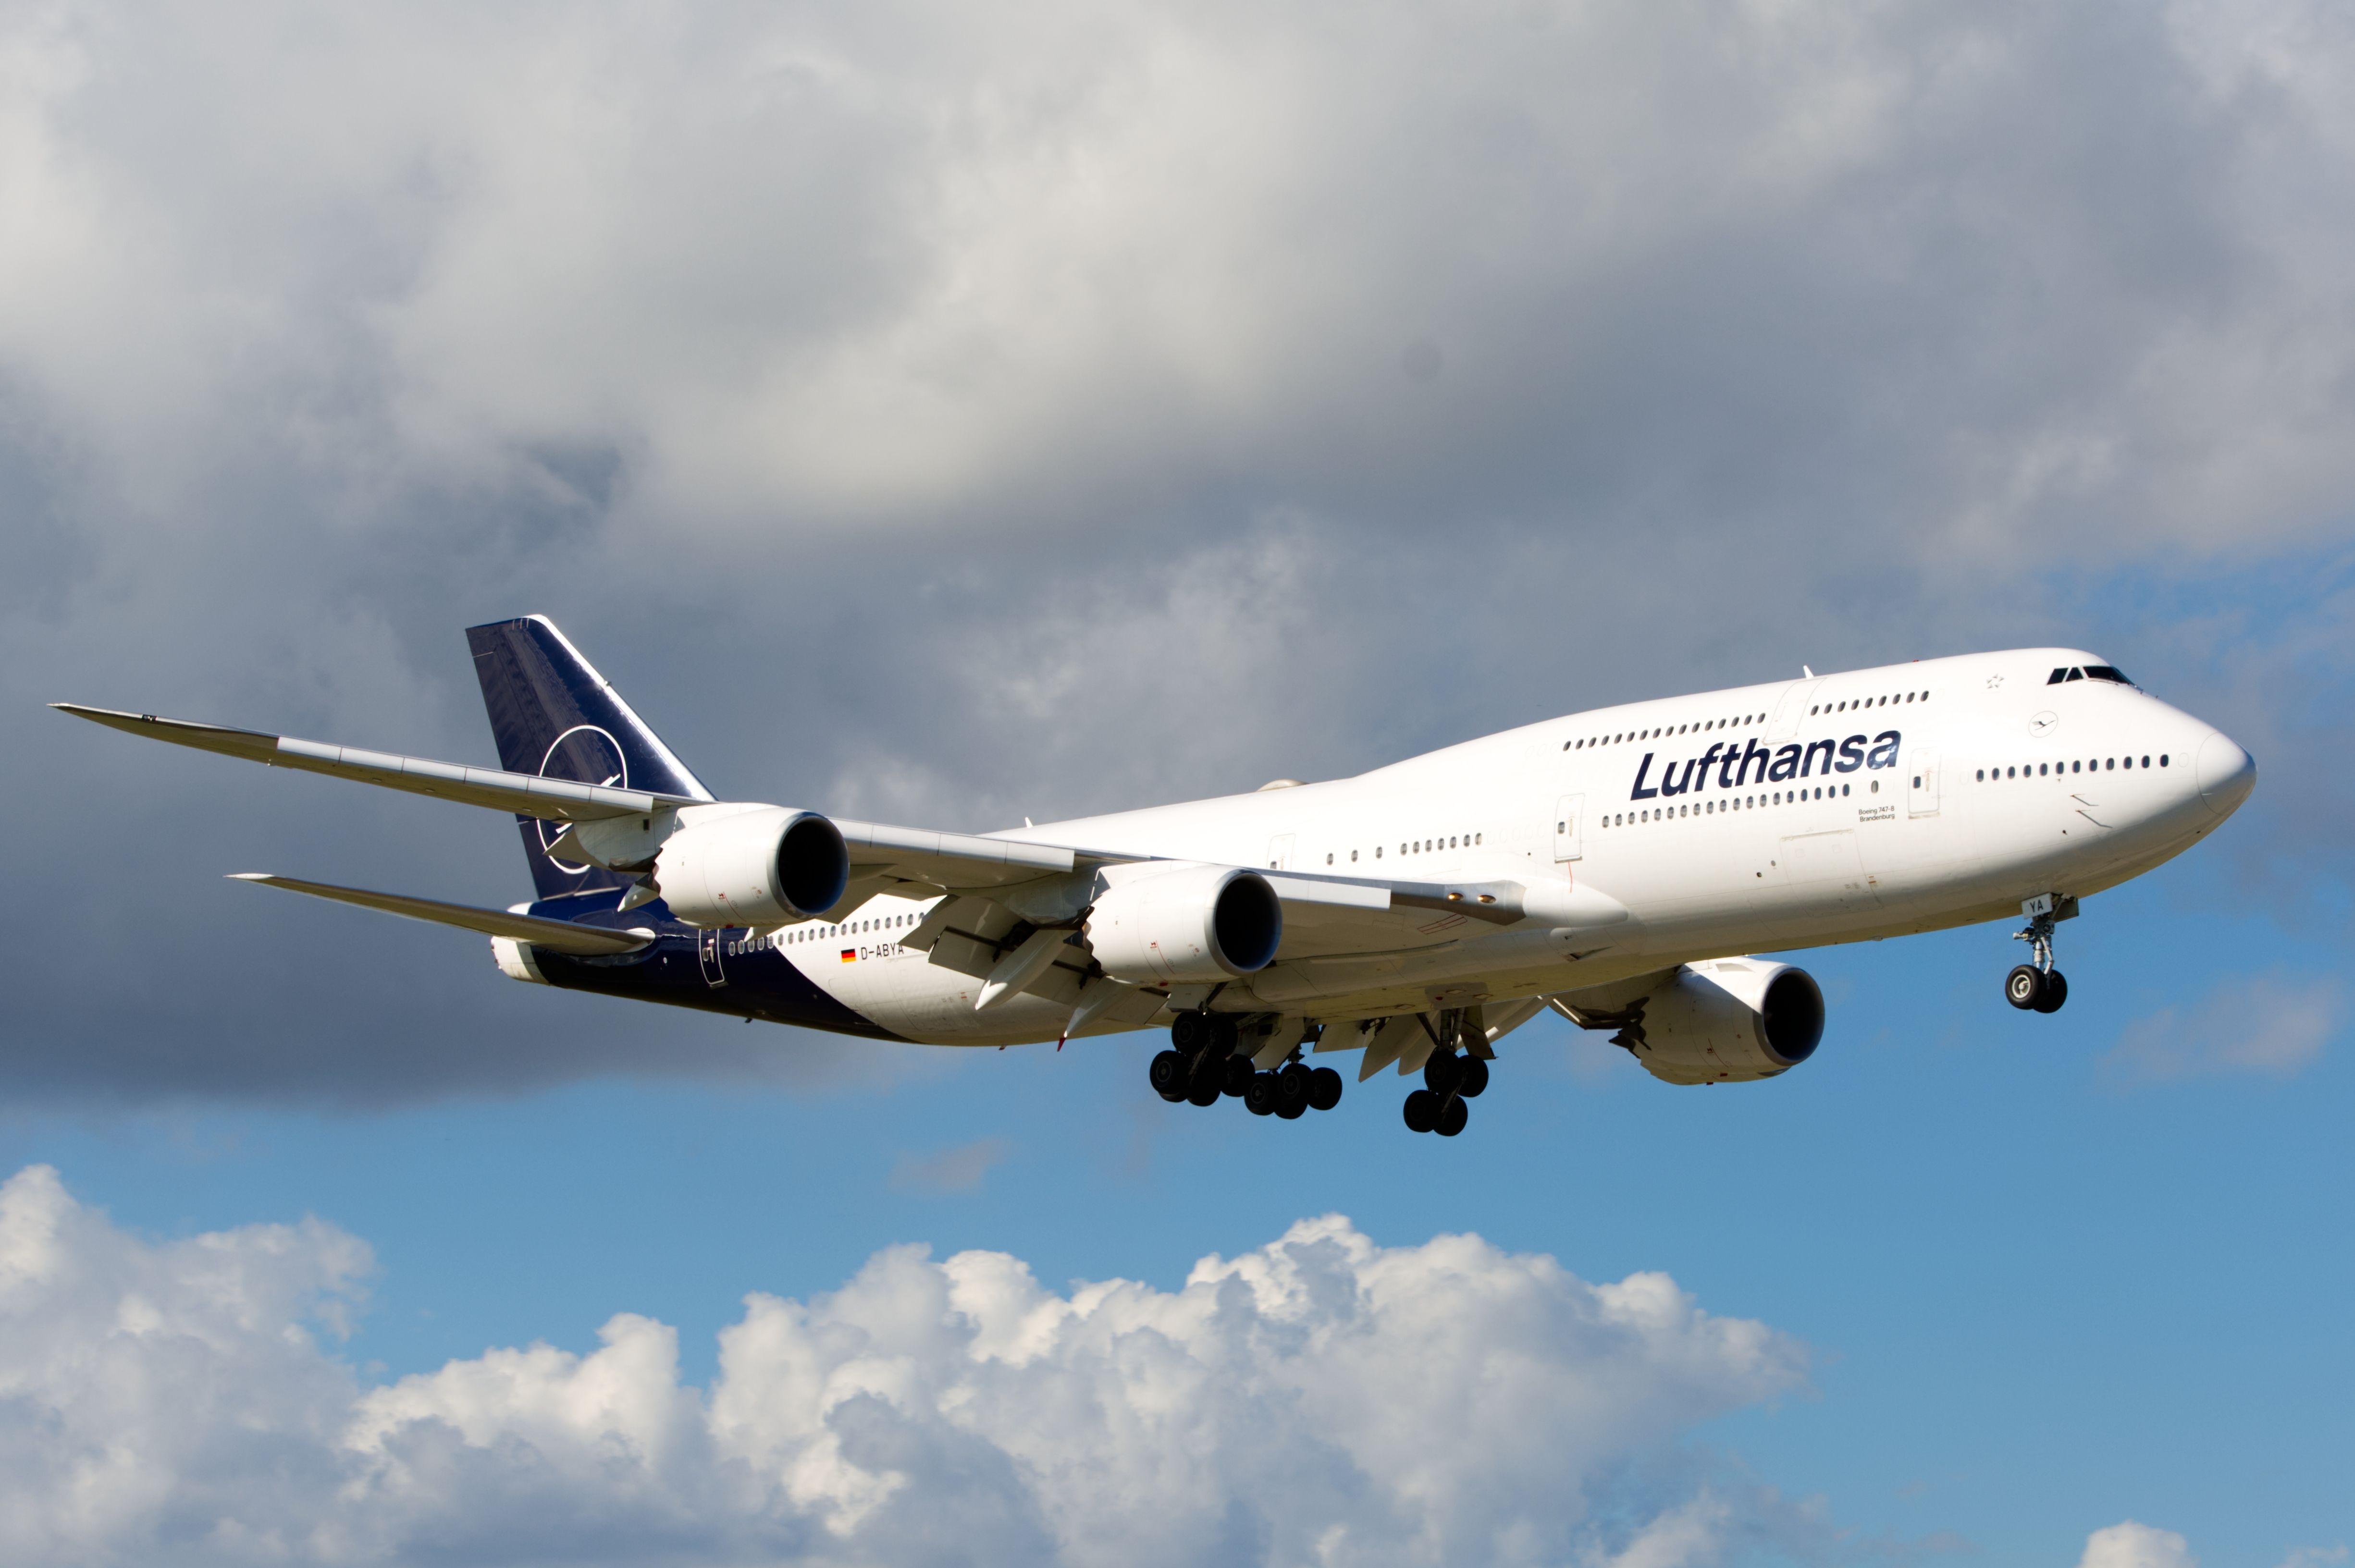 A Lufthansa Boeing 747 about to land.